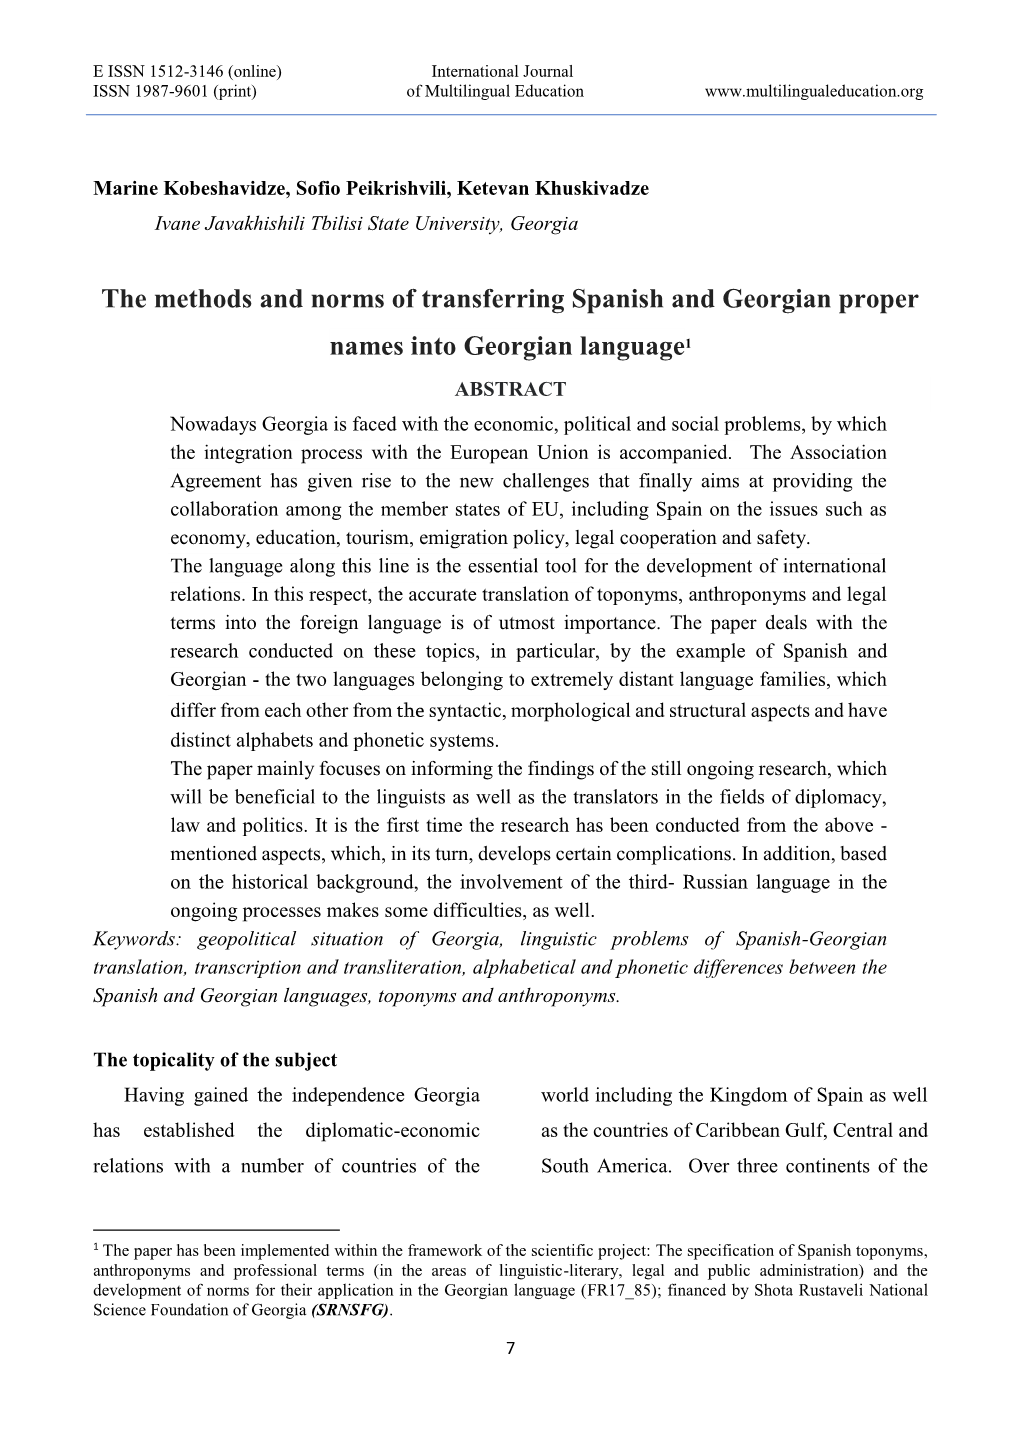 The Methods and Norms of Transferring Spanish and Georgian Proper Names Into Georgian Language1